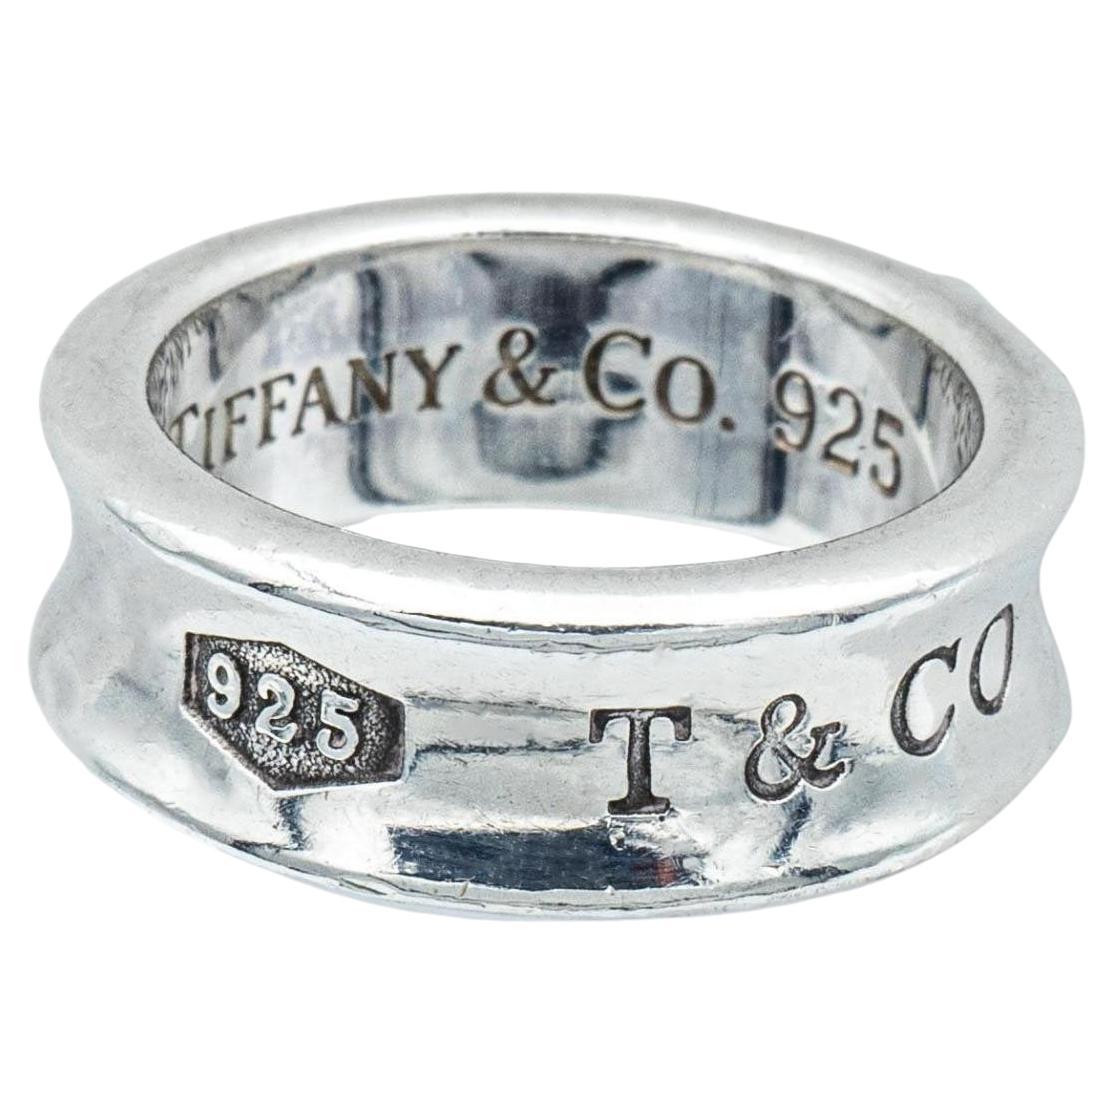 Tiffany & Co. Sterling Silver 1837 Band Ring - Ann's Fabulous Closeouts